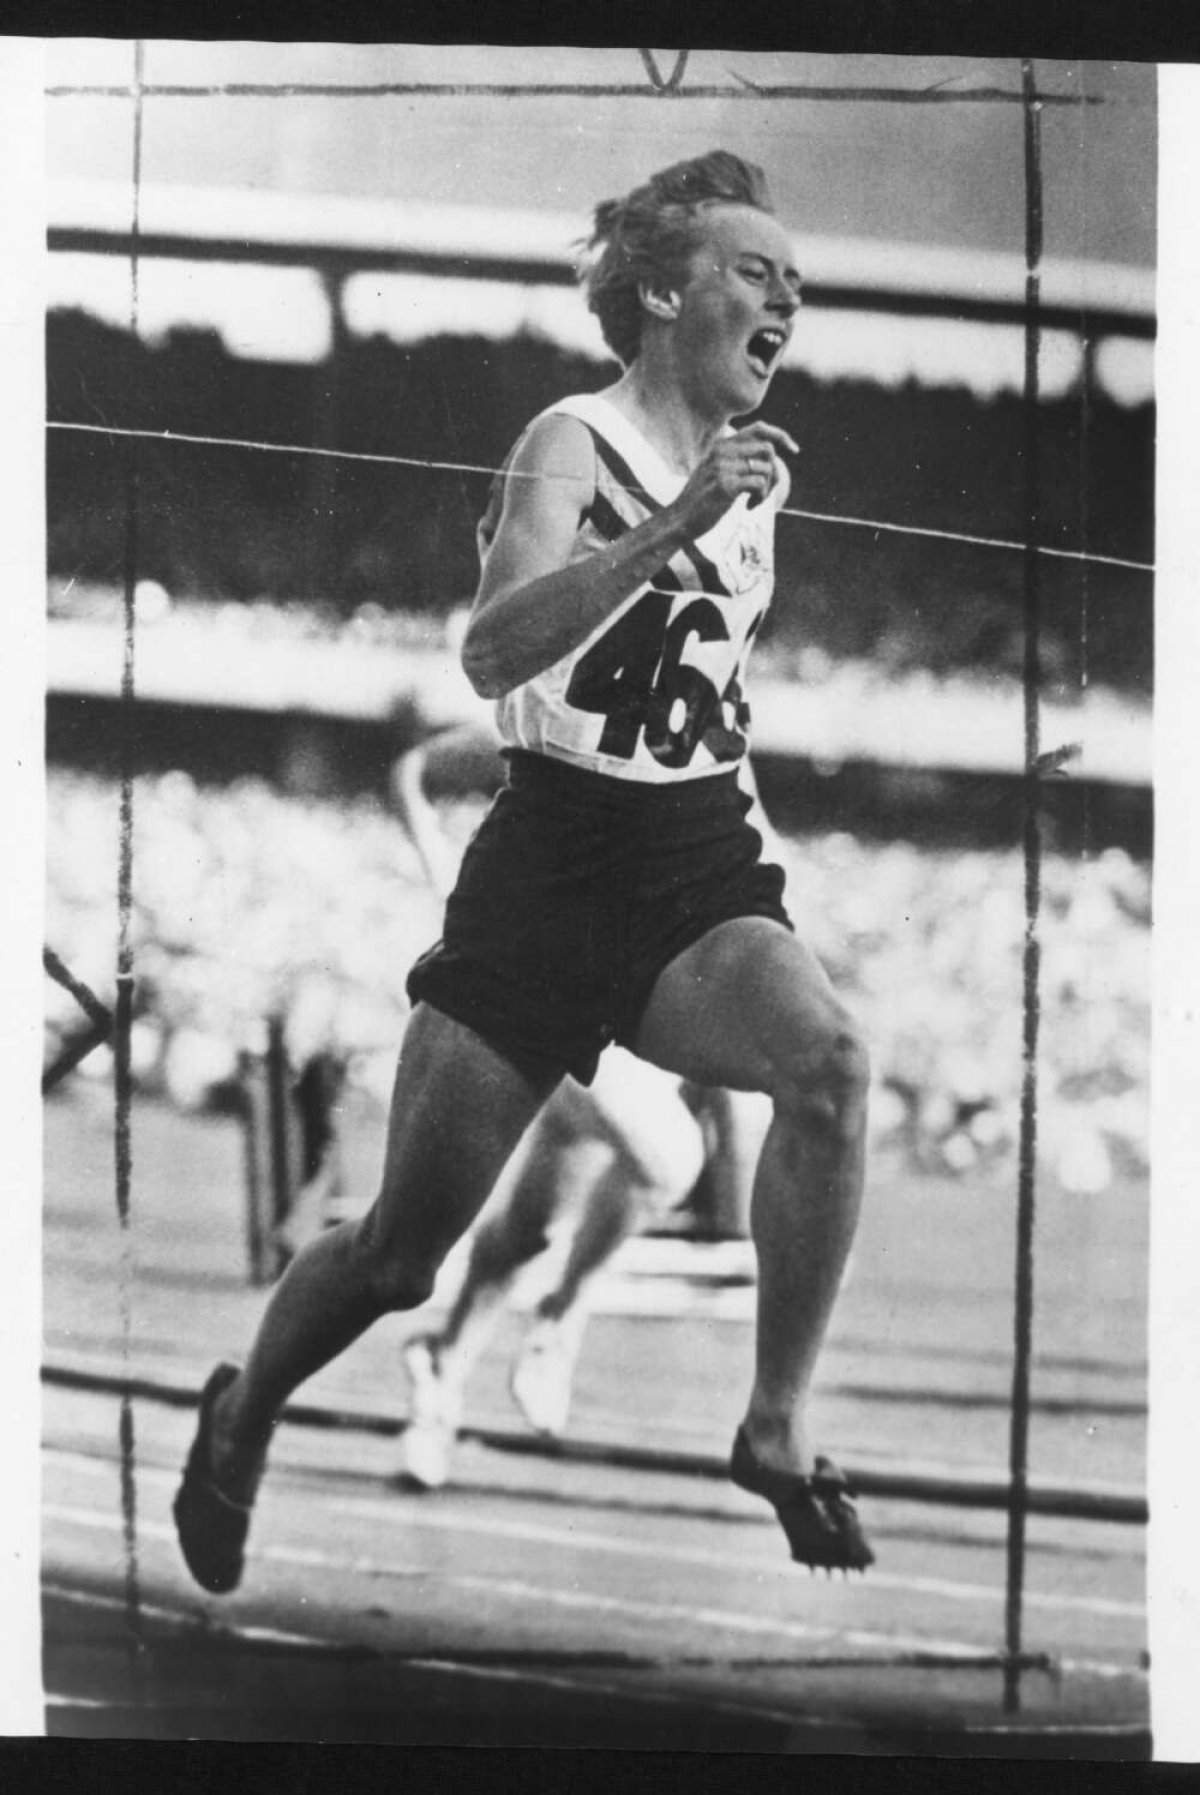 A black and white photo of Betty Cuthbert running on the track.